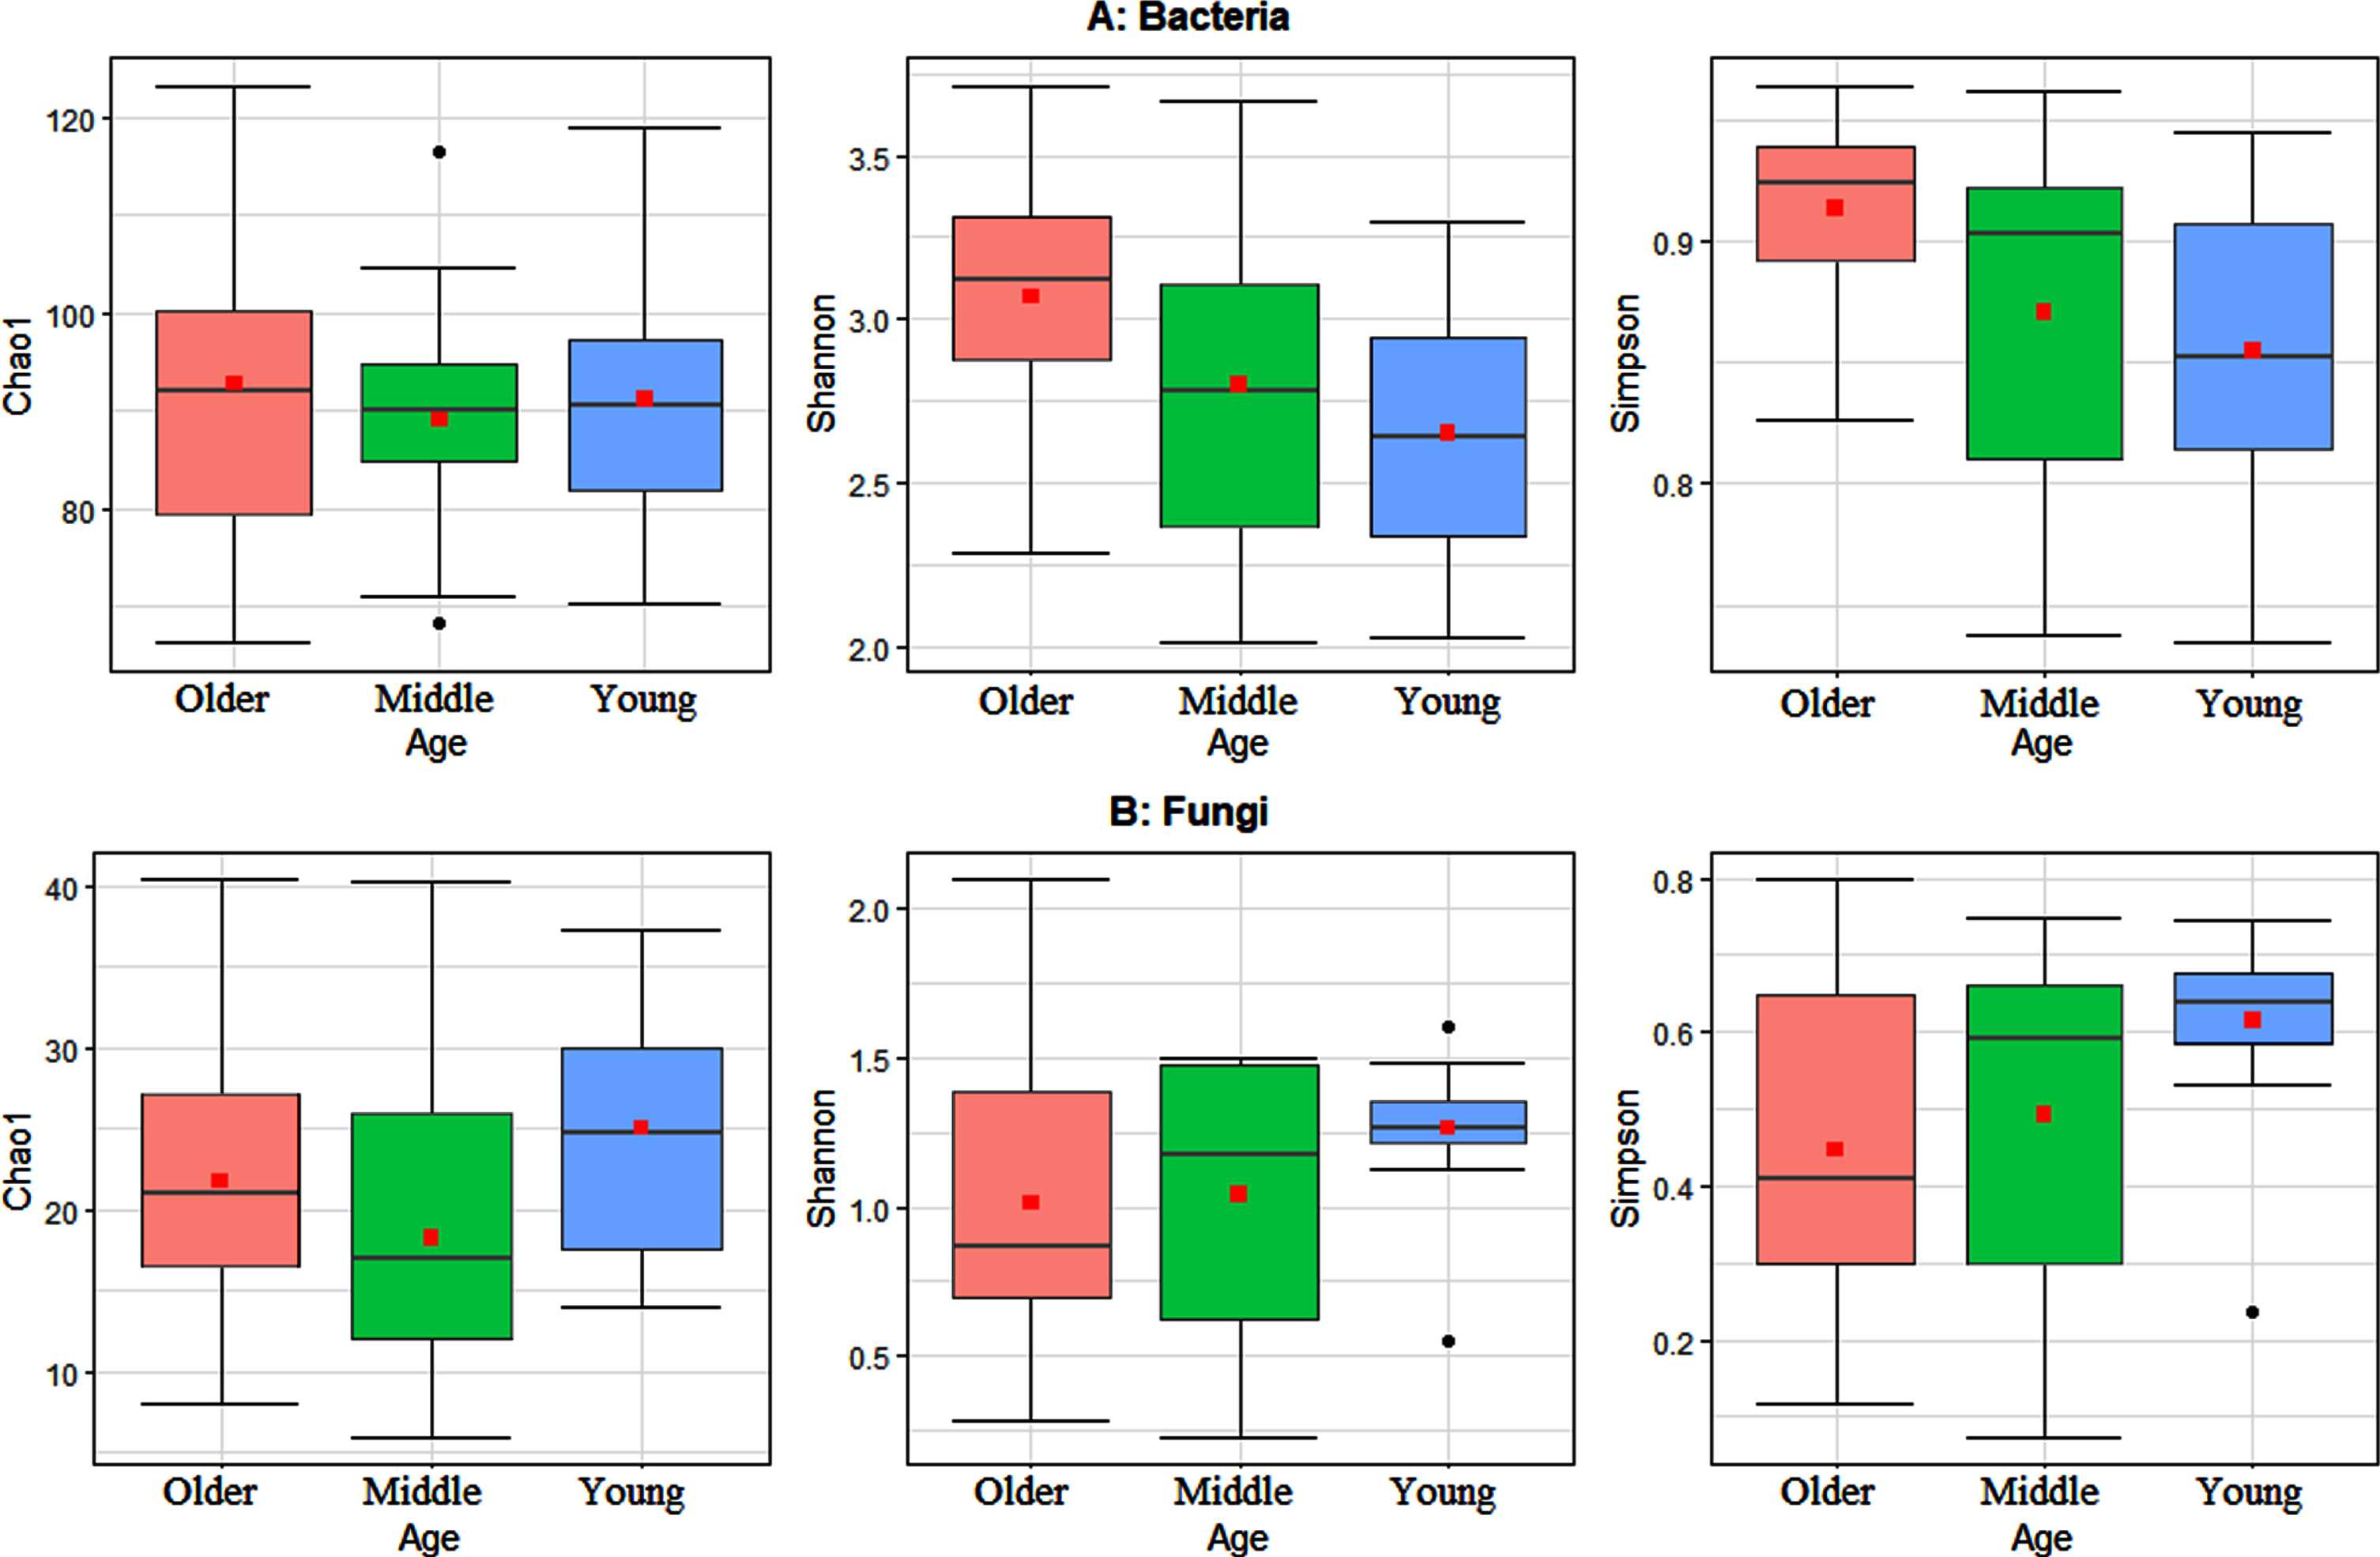 Boxplots of the three studied alpha diversity metrics Chao1, Shannon, and Simpson indices. A) Alpha diversity metrics for the gut bacterial community. B) Alpha diversity metrics for the gut fungal community. Statistically significant differences were determined using Wilcoxon sum rank test, with alpha diversity as the response variable, and age as a crossed predictor variable. Wilcoxon sum rank results show significant differences of Shannon and Simpson diversity indices between young and older age groups for bacteria (max P-value < 0.02). Wilcoxon sum rank results show significant differences of Chao1, Shannon and Simpson diversity indices between young and older age groups for fungi (max p-values < 0.042). Friedman test results show insignificant differences of Chao1, Shannon and Simpson diversity indices among young, middle and older age groups (each P-values > 0.10). The bold point in each box plot represents the average value.